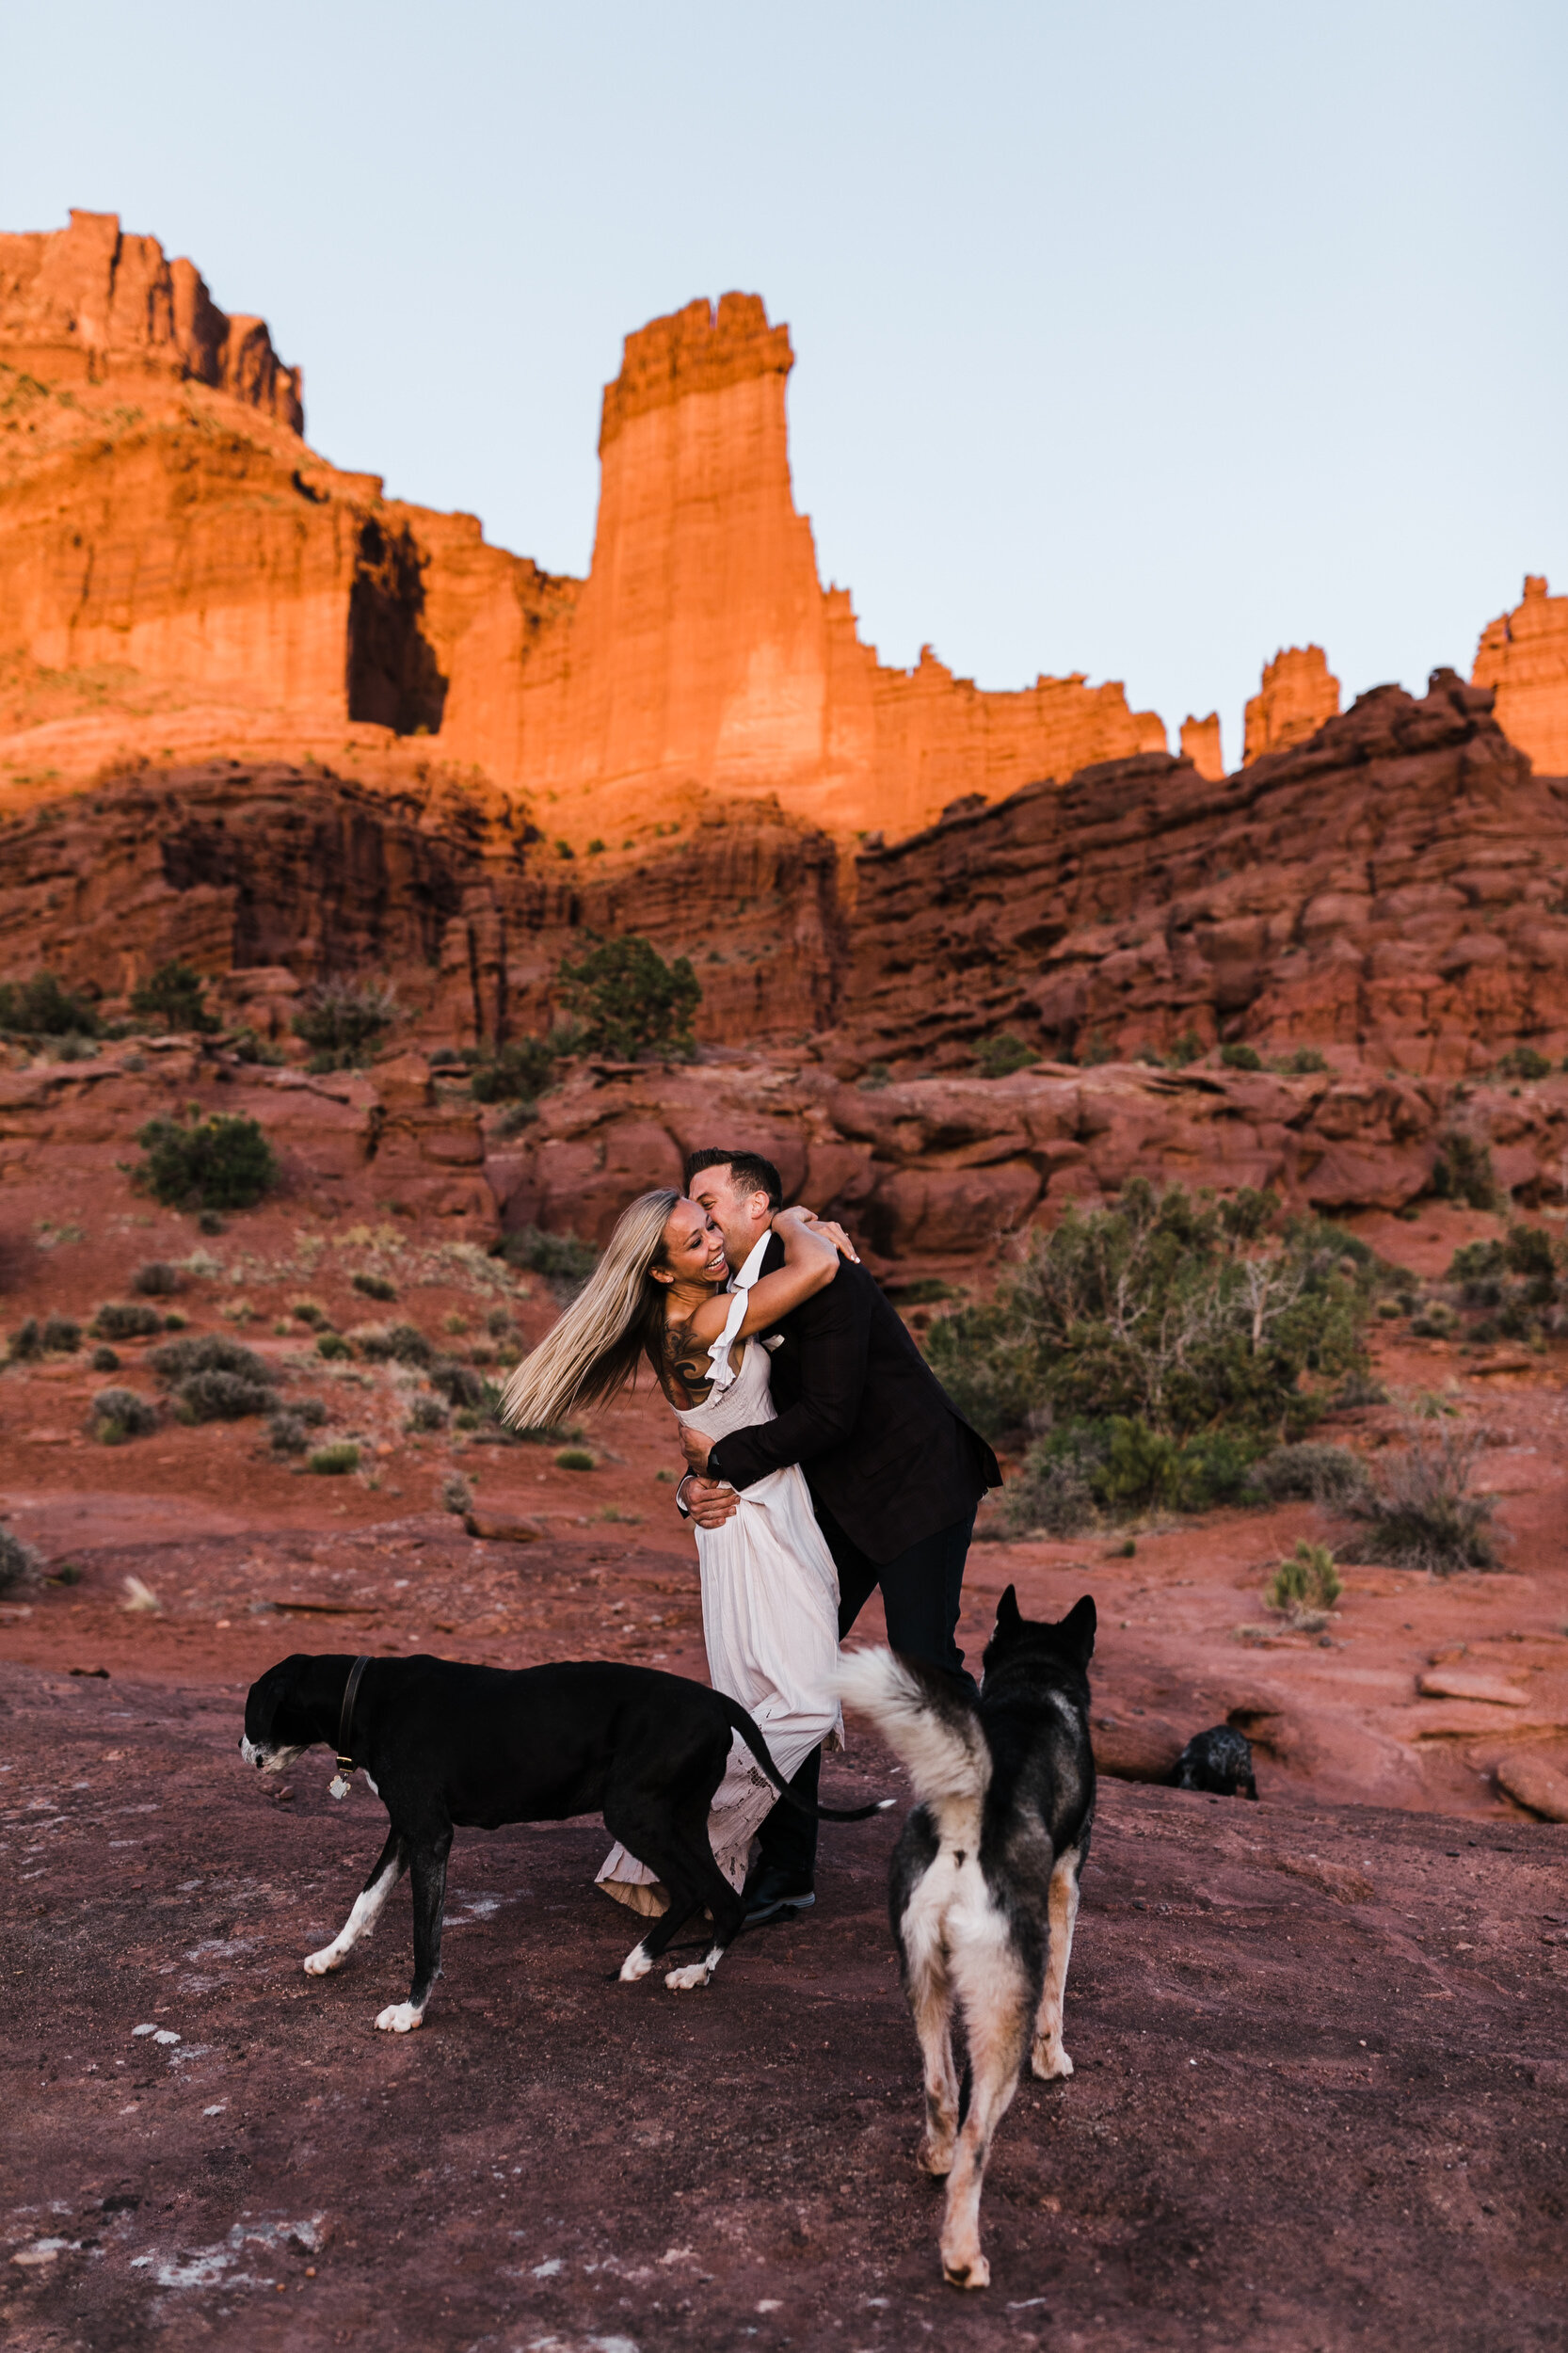 Engagement Photos with Dogs in Moab, UtahBest of 2020, Our Favorite Wedding Photos of the Year | The Hearnes Adventure Wedding Photography